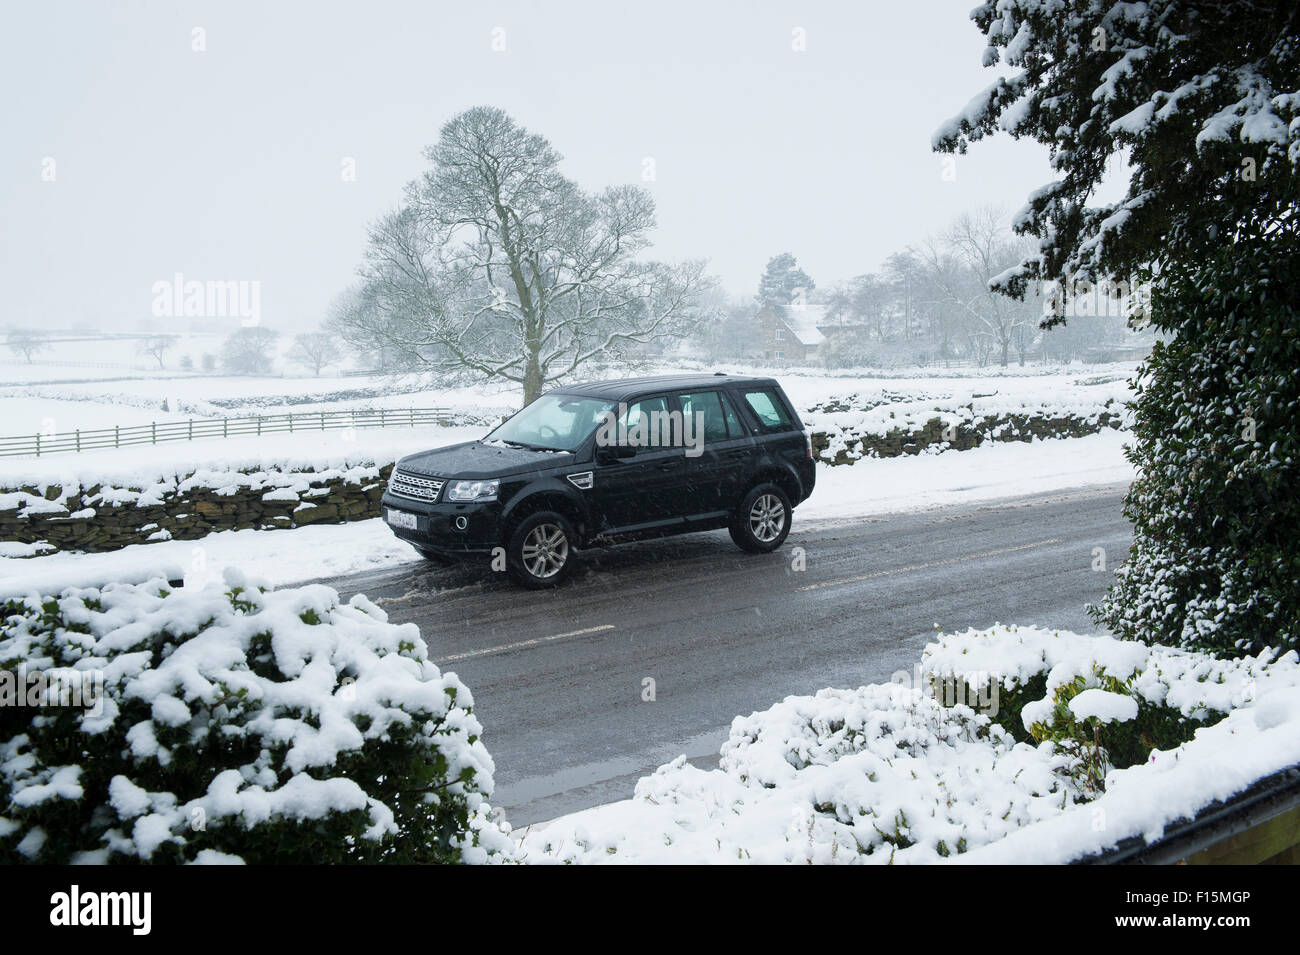 Snowing & a Land Rover Freelander 2, four-wheel drive vehicle (4x4) is parked on a snow-covered countryside road in winter - Yorkshire, England, UK. Stock Photo